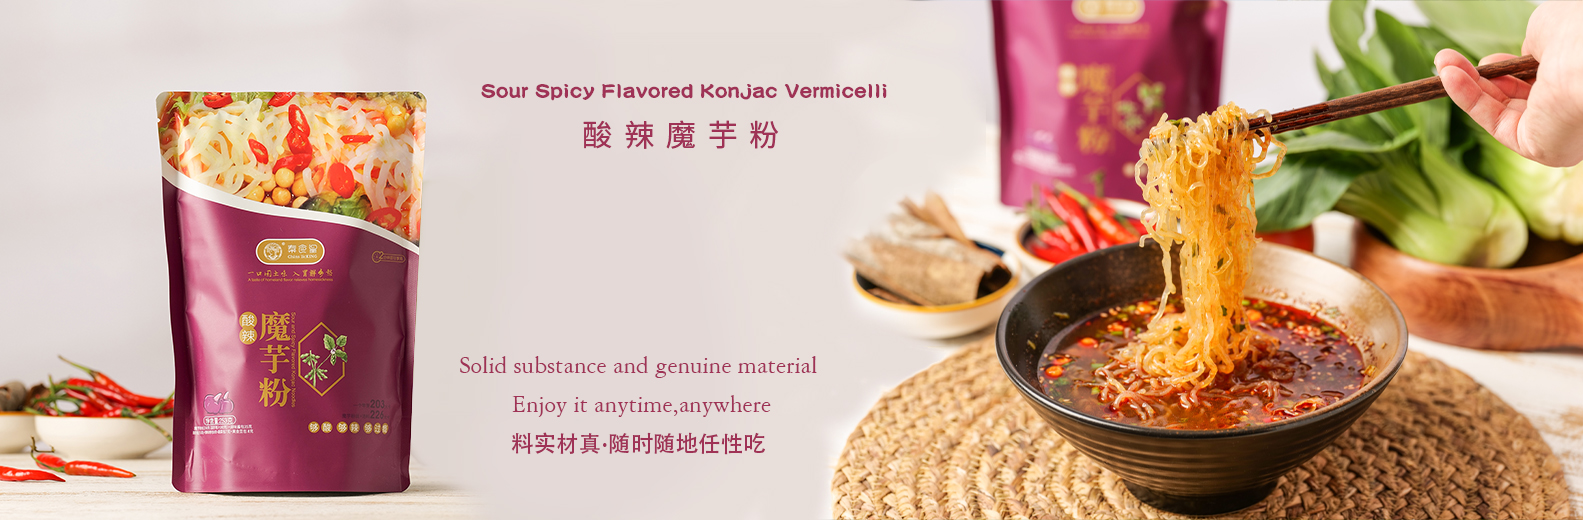 Sour Spicy Flavored Konjac Vermicelli